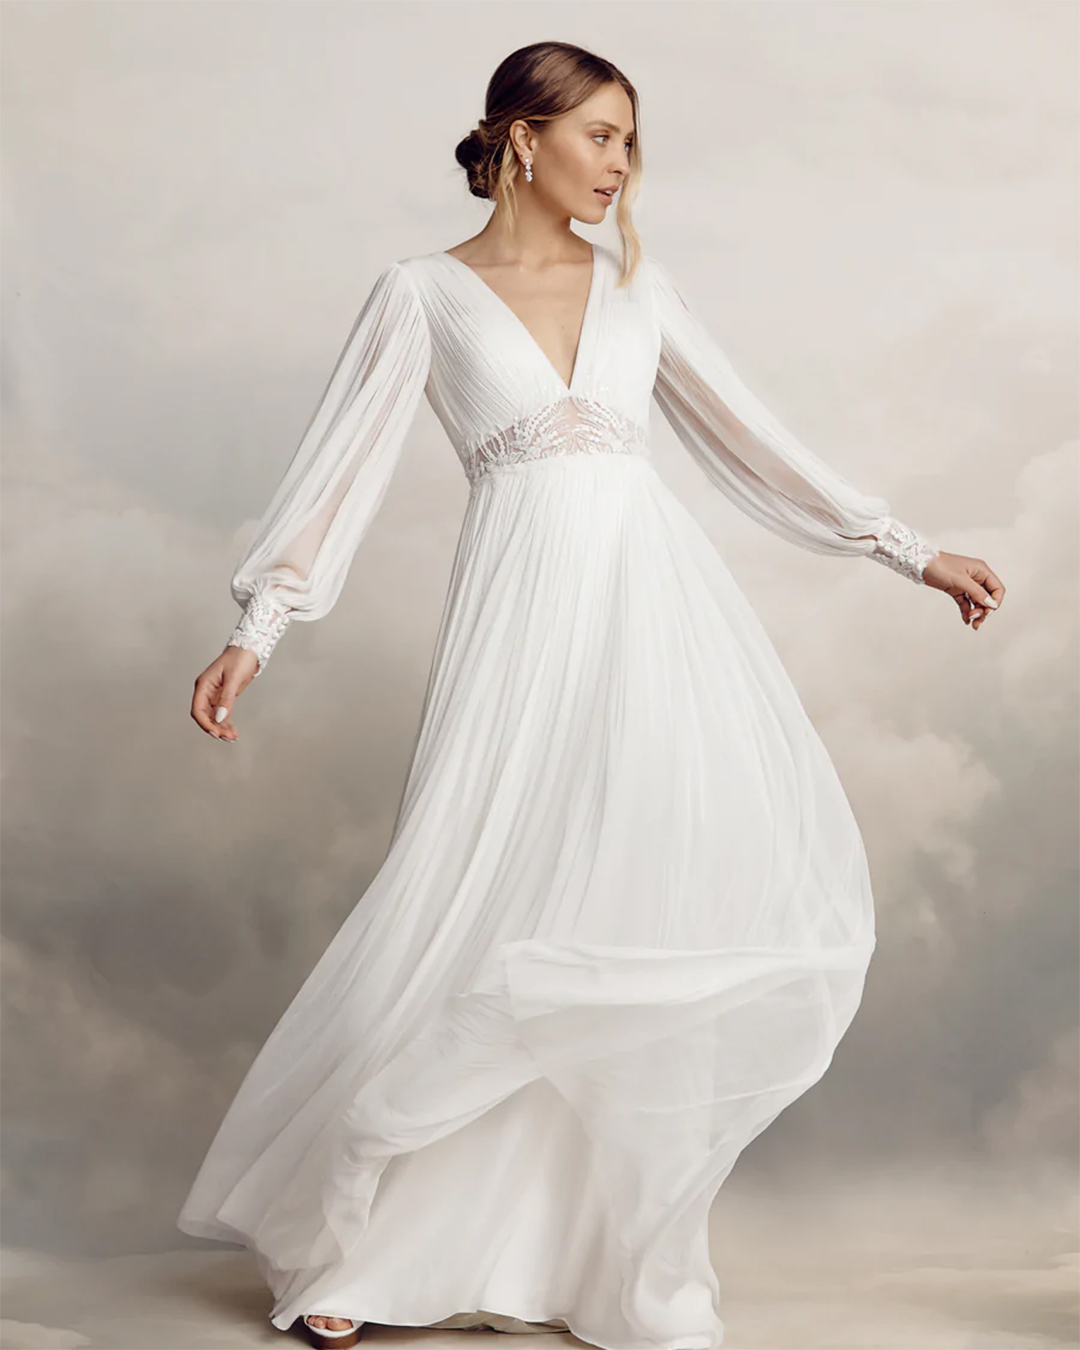 greek wedding dresses a line with long sleeves simple catherinr deane